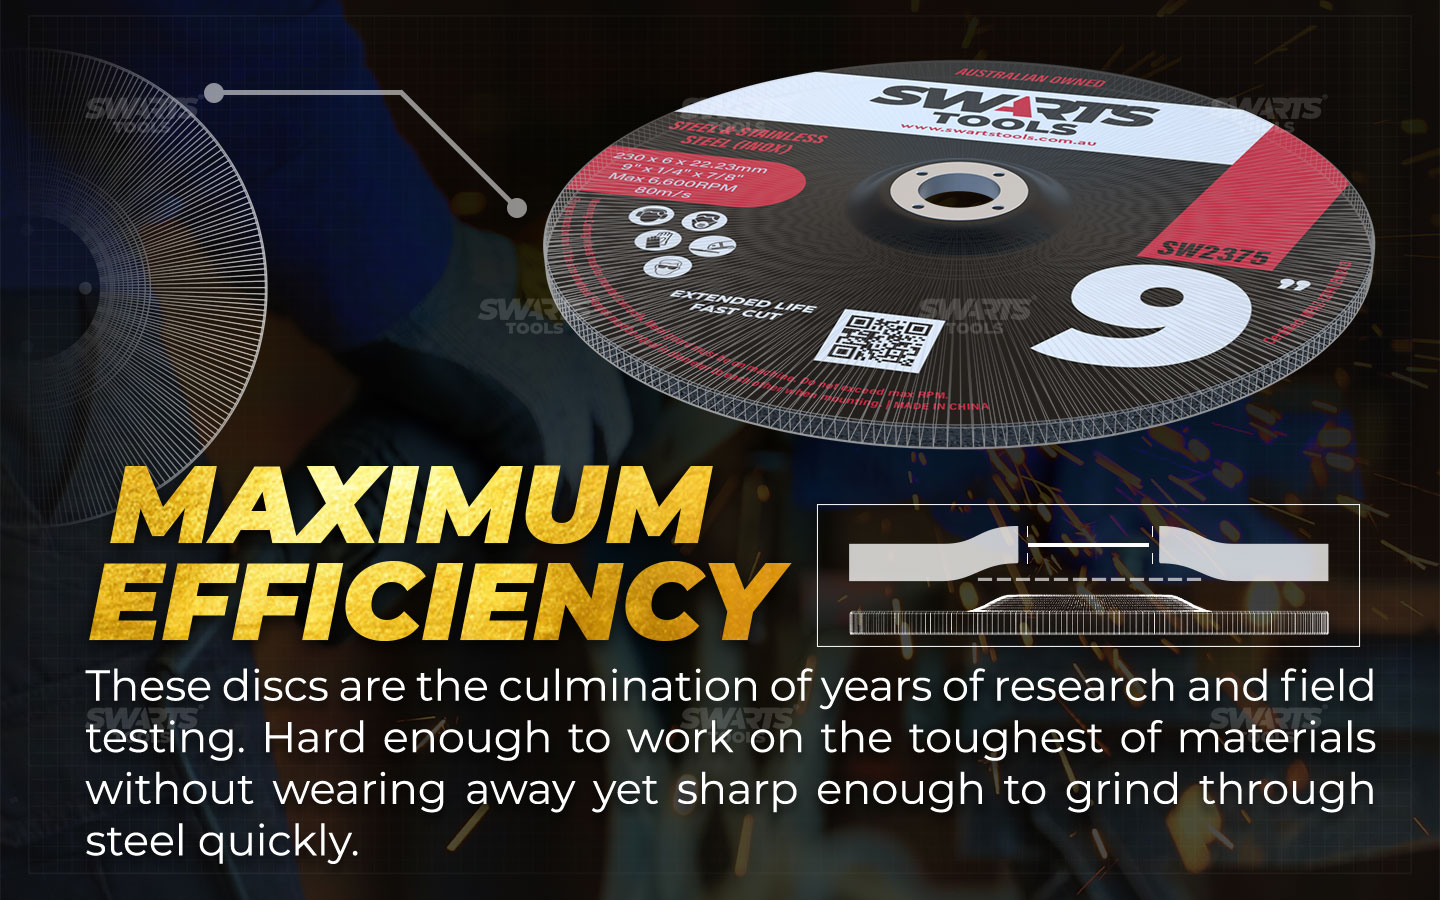 Maximum efficiency, These discs are the culmination of years of research and field testing. hard enough to work on the toughest of matterials without wearing away yet sharp enough to grind through steel quickly.